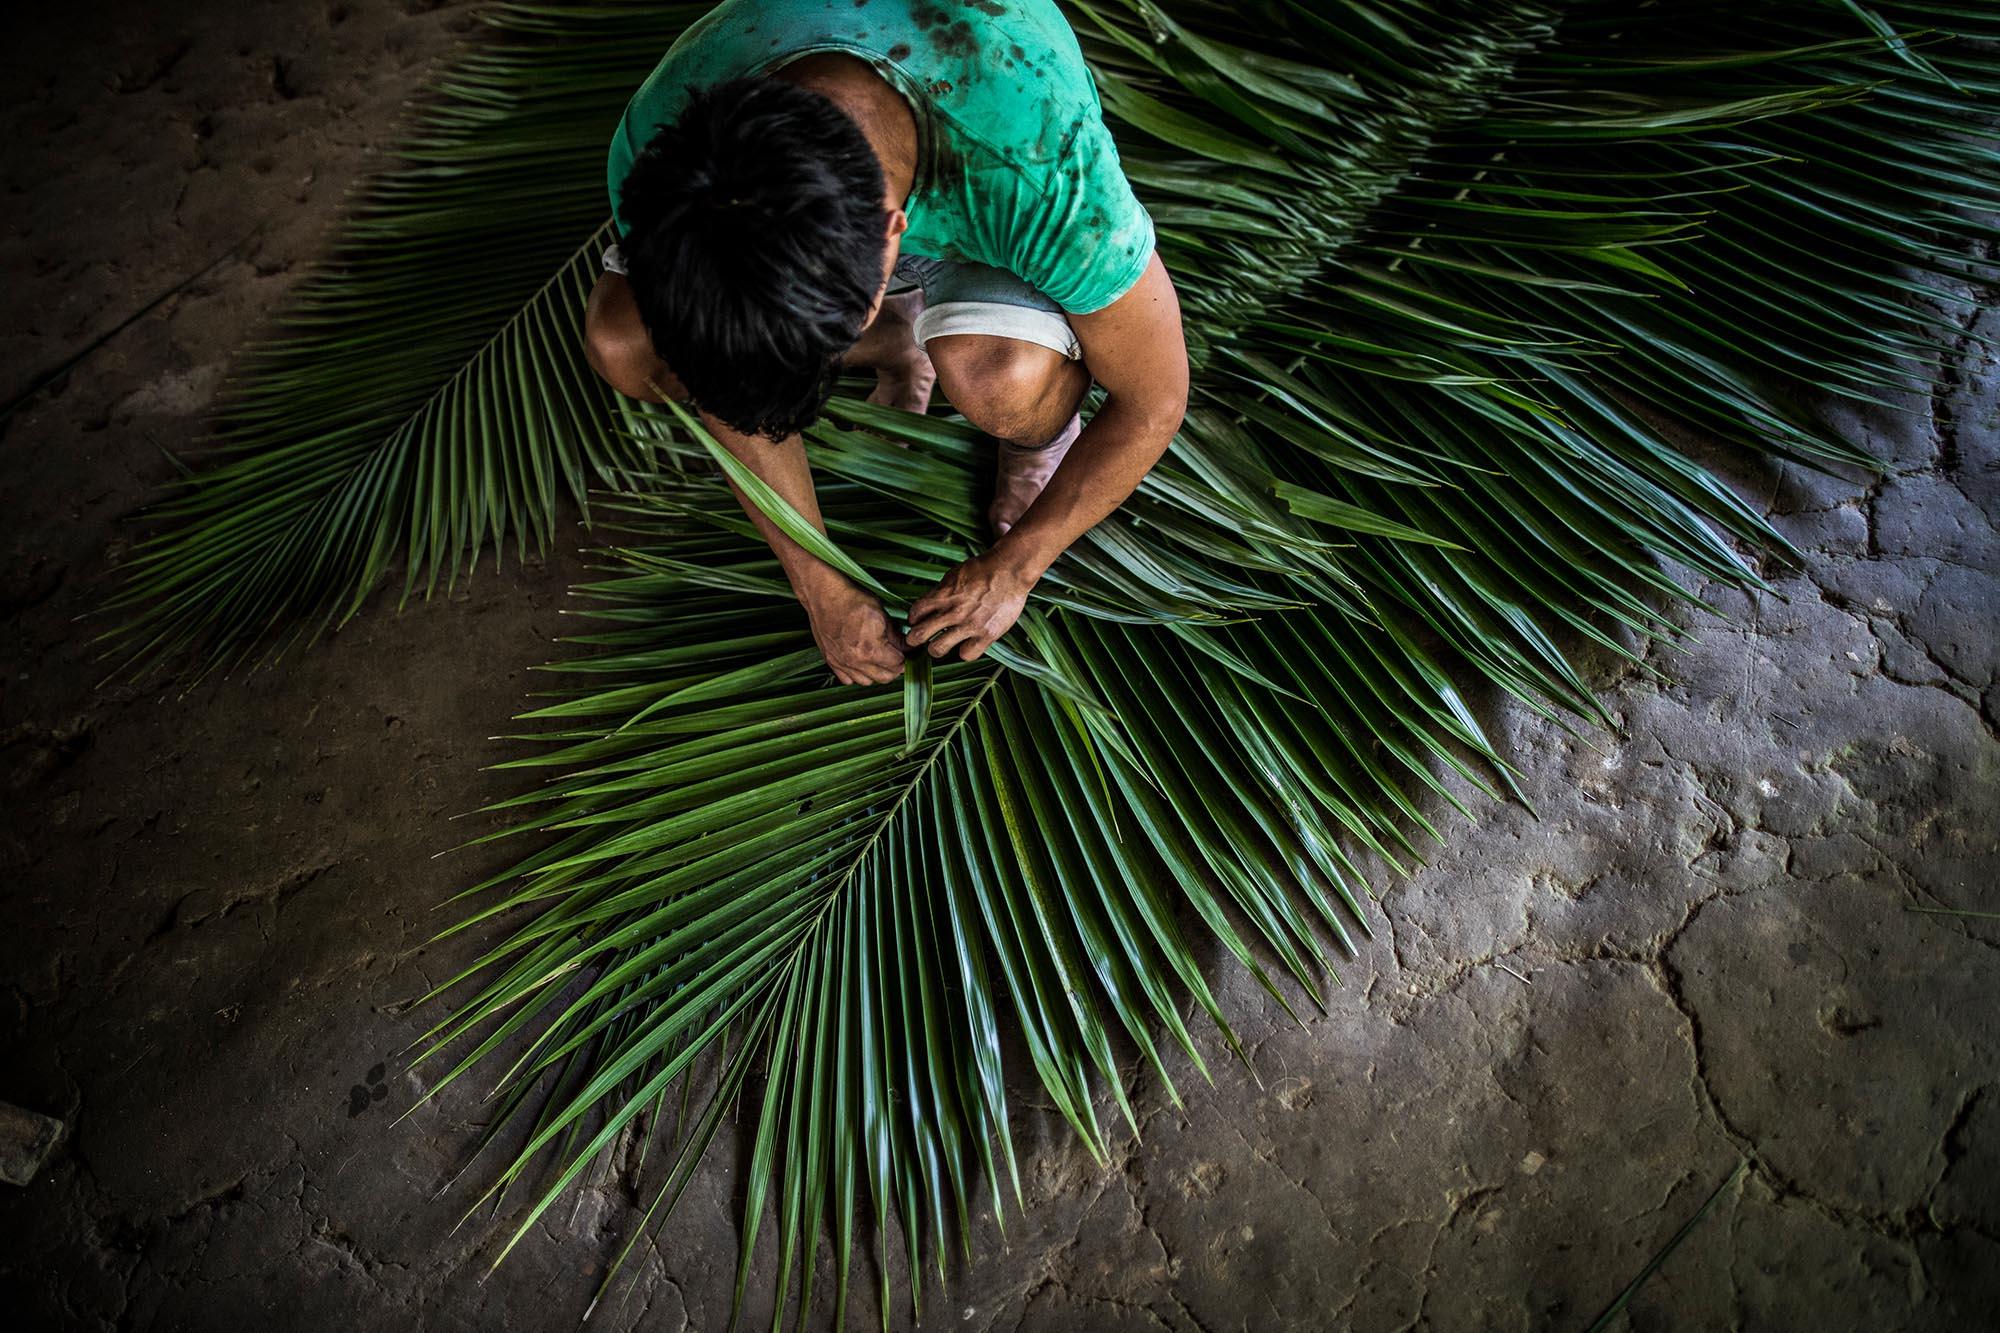 Ecuador, the living forest - The palm tree is useful all the way. There are many...